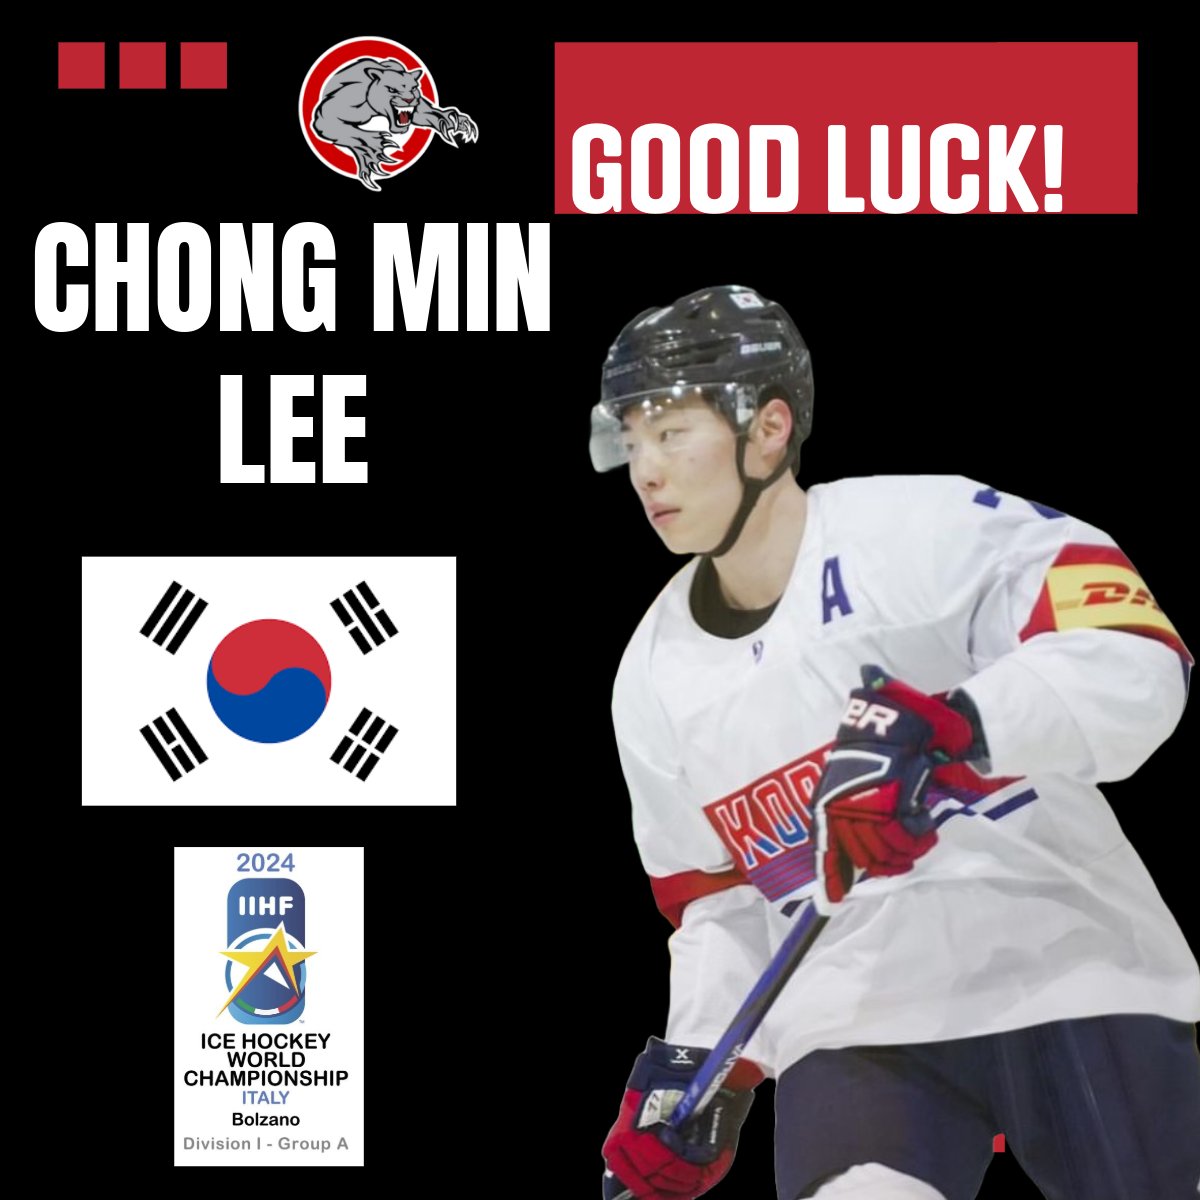 Best of luck to Panthers alumnus Chong Min Lee and #TeamKorea 🇰🇷 at the Group A - Division I IIHF Hockey World Championship in Bolzano, Italy! The tournament runs until this Saturday! 🏒🥅 

#HockeyWorlds #GoKorea #PJHL #PortMoodyPanthers #PanthersAlumni #KoreaHockey #PortMoody